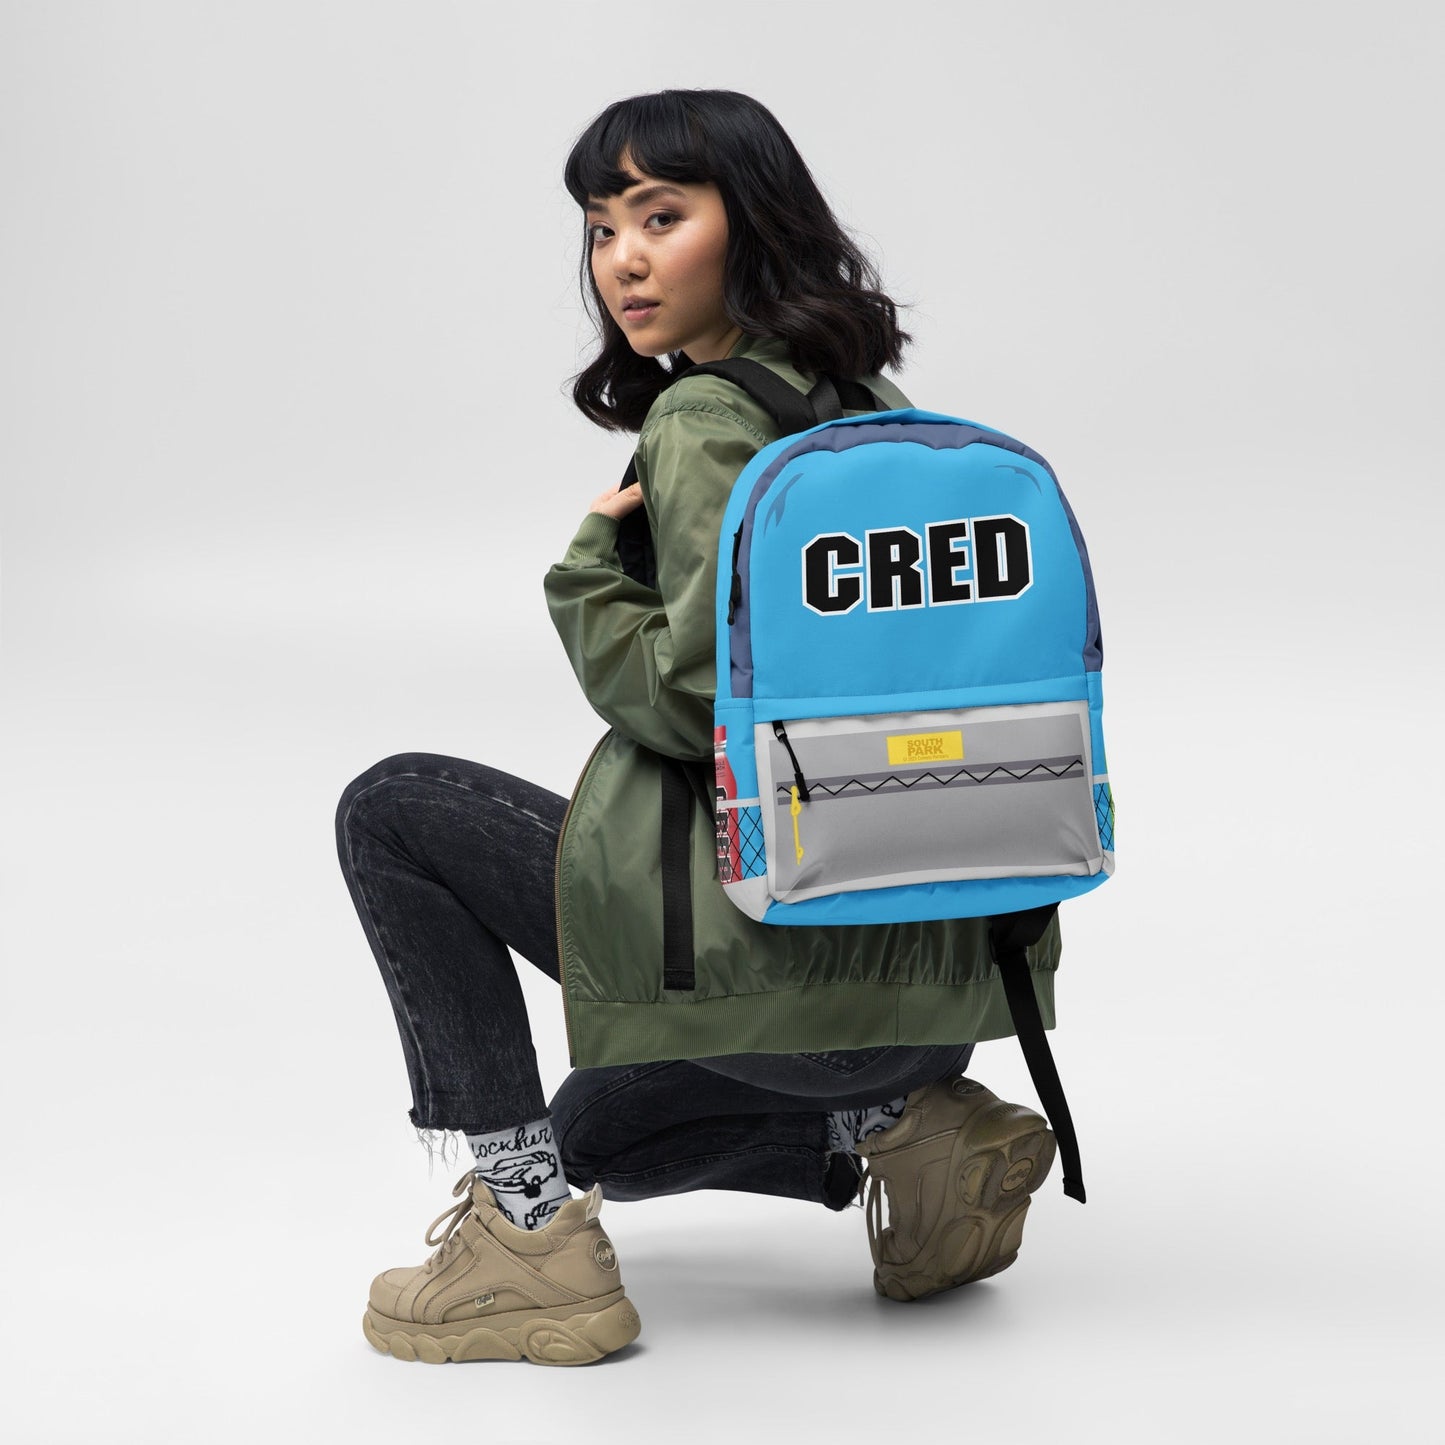 South Park CRED Backpack - Paramount Shop